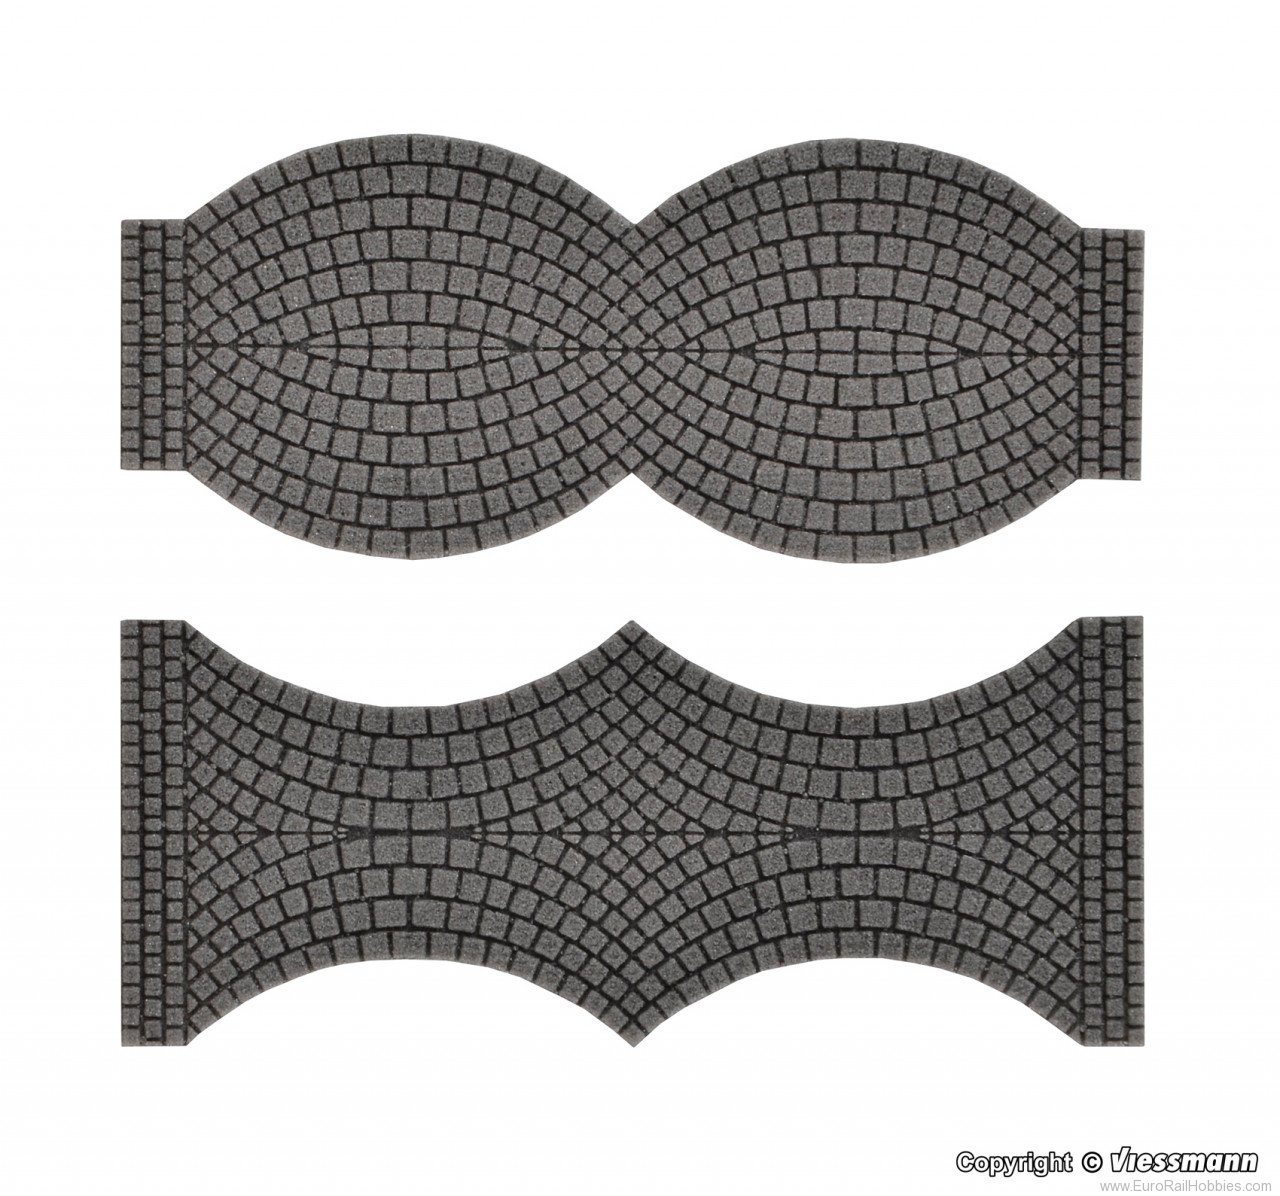 Vollmer 48244 Street plate cobblestone, 2 tails of each end